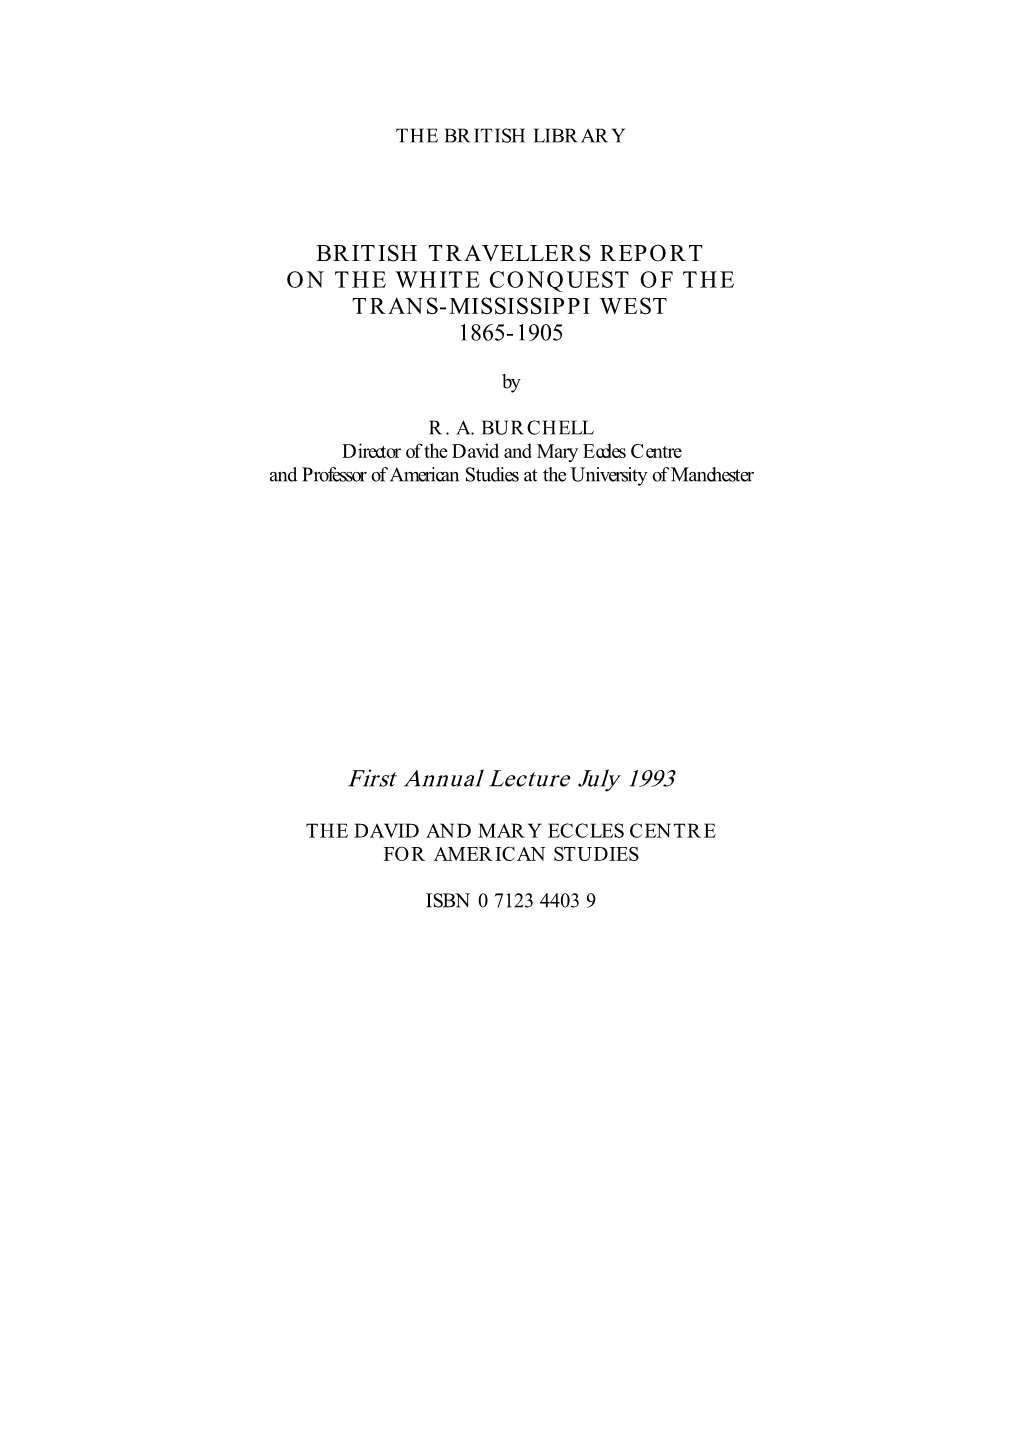 British Travellers Report on the White Conquest of the Trans-Mississippi West, 1865-1905